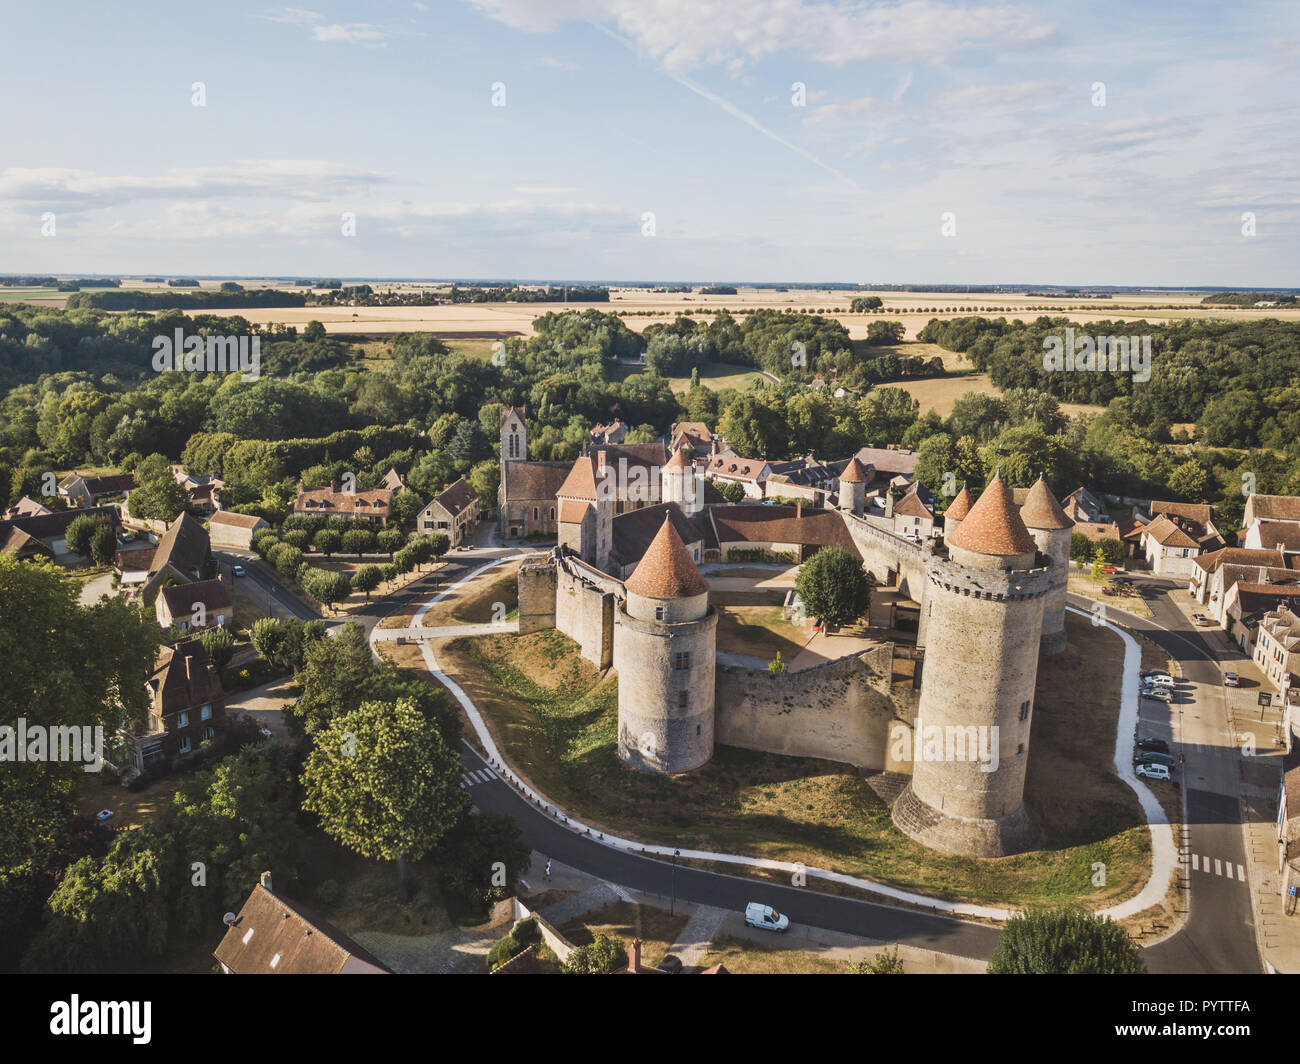 Castle Blandy les tours in France, aerial view of medieval chateau museum Stock Photo